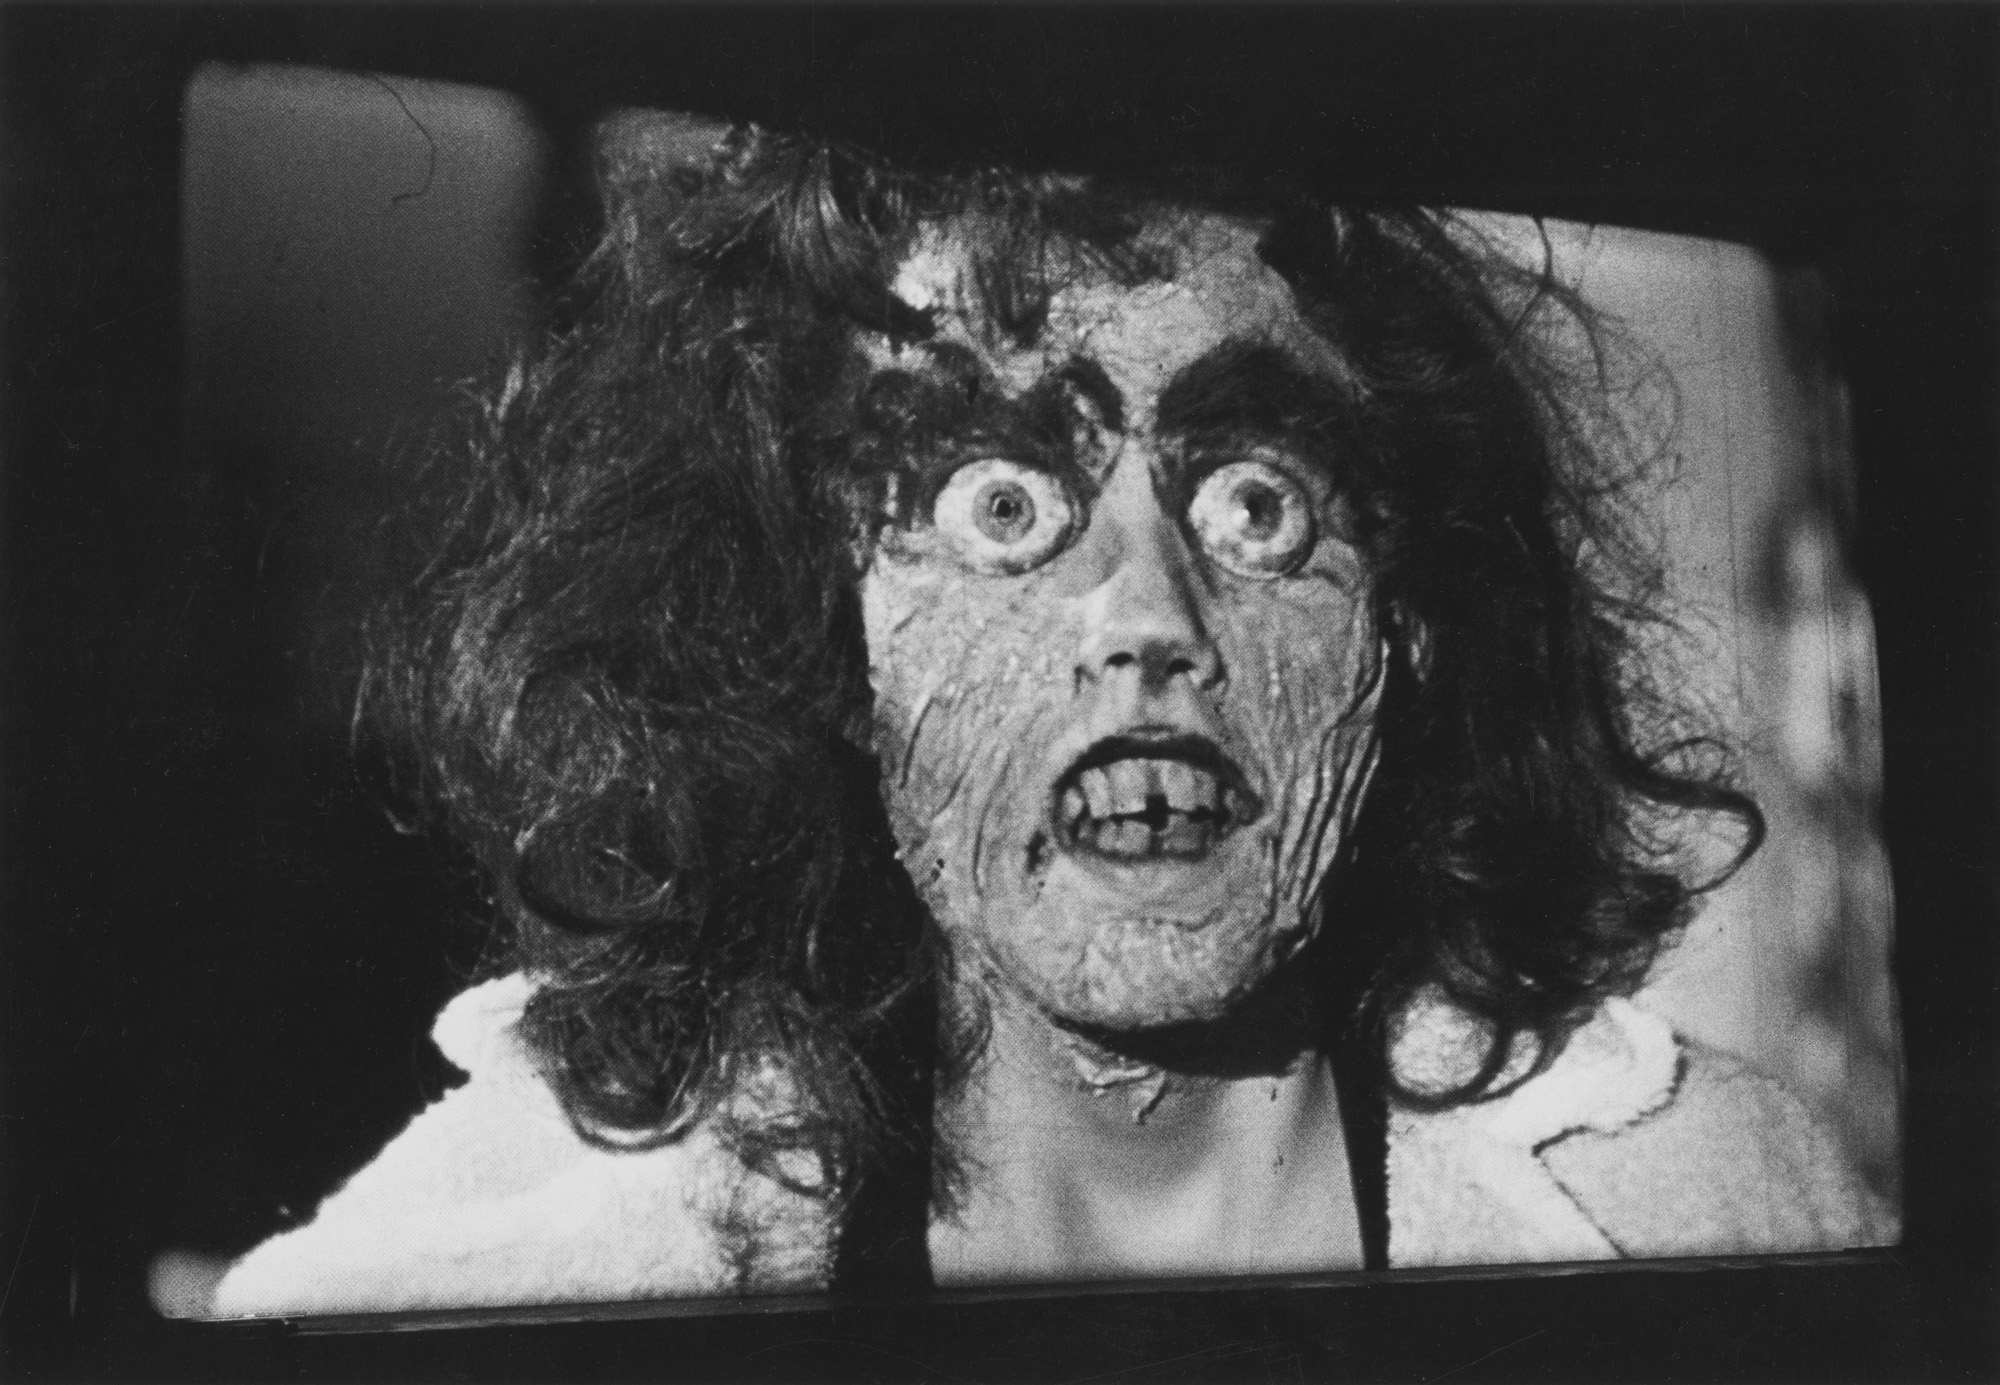 Black and white photograph of projected film of made-up monster face